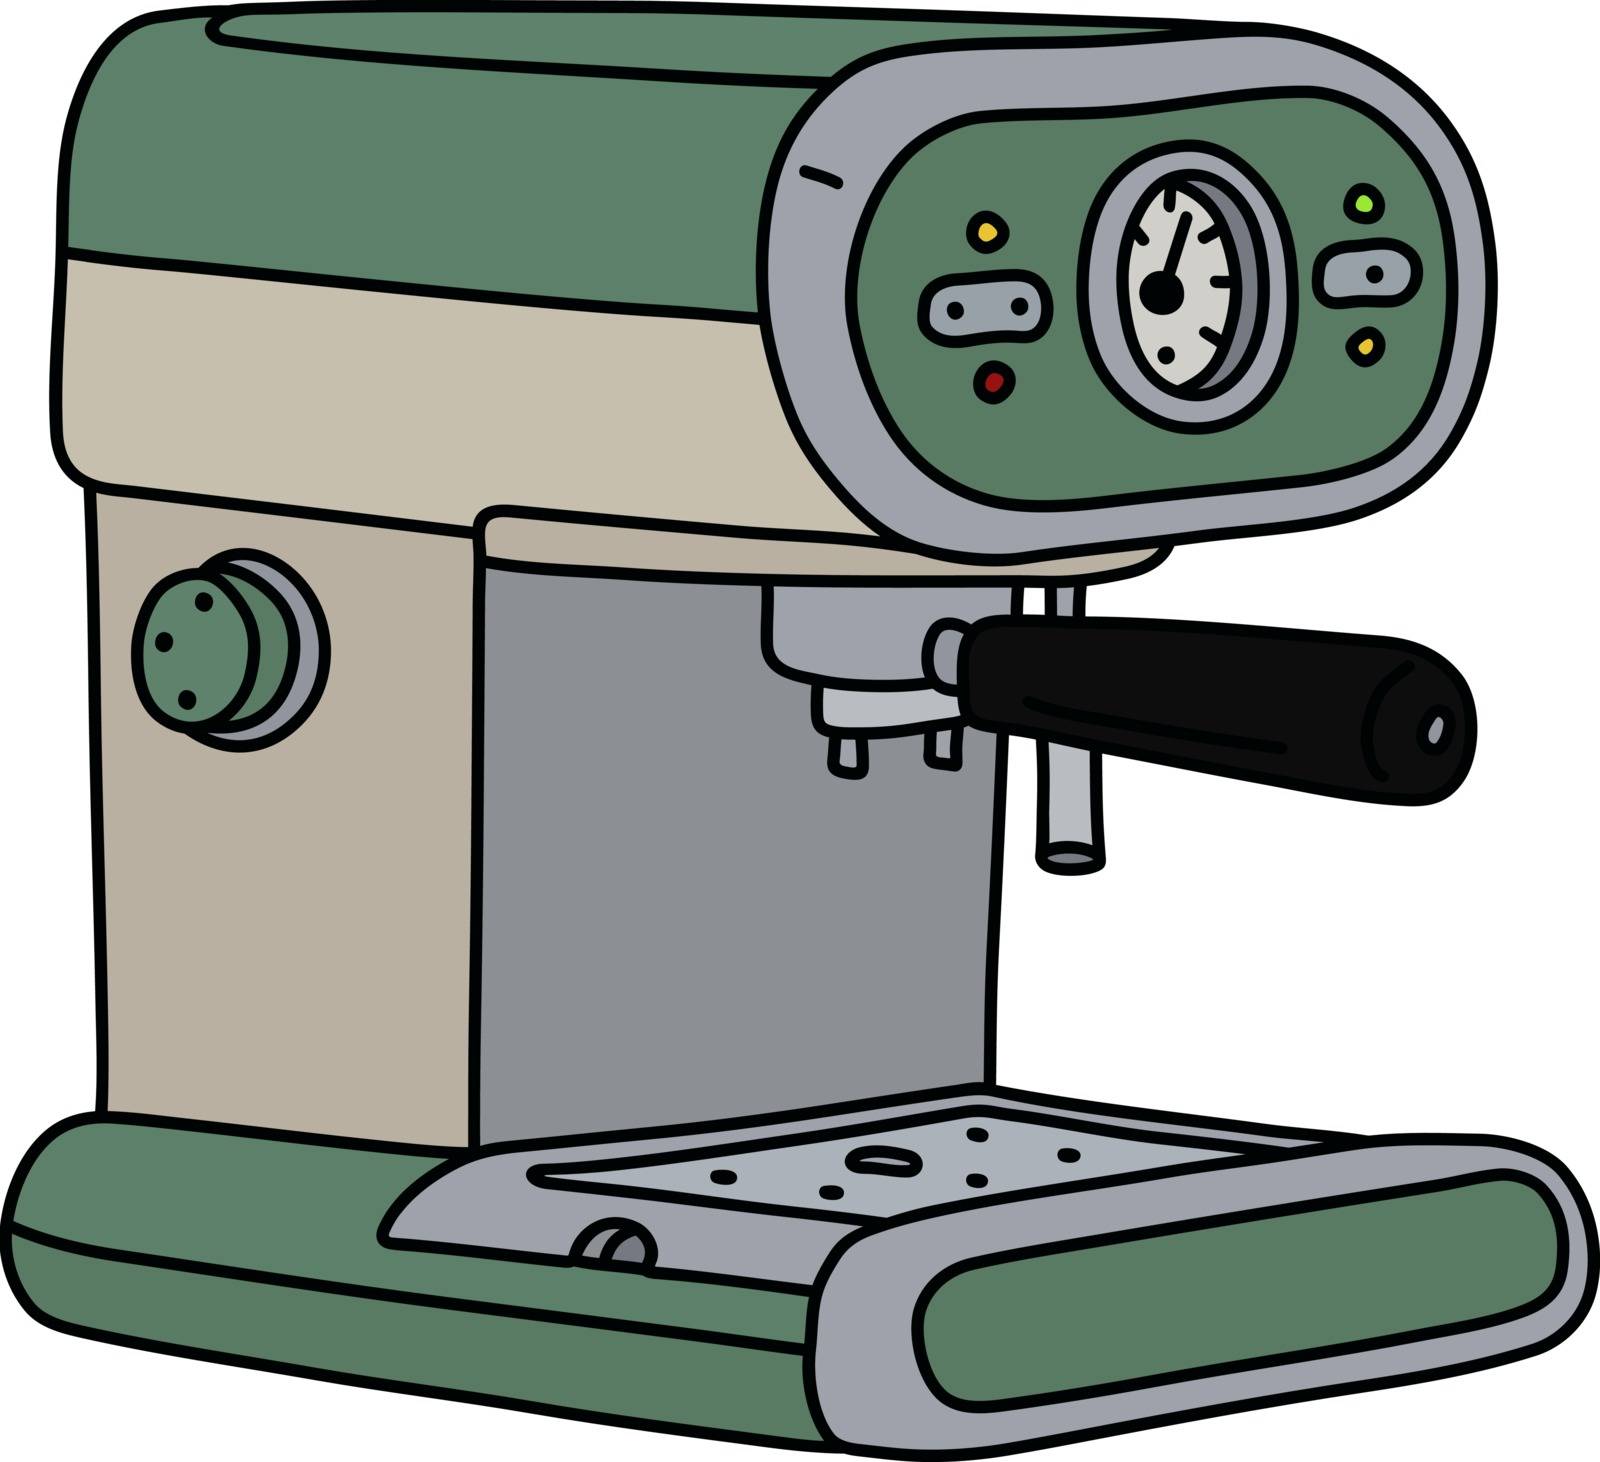 The vectorized hand drawing of a retro green and cream electric espresso maker